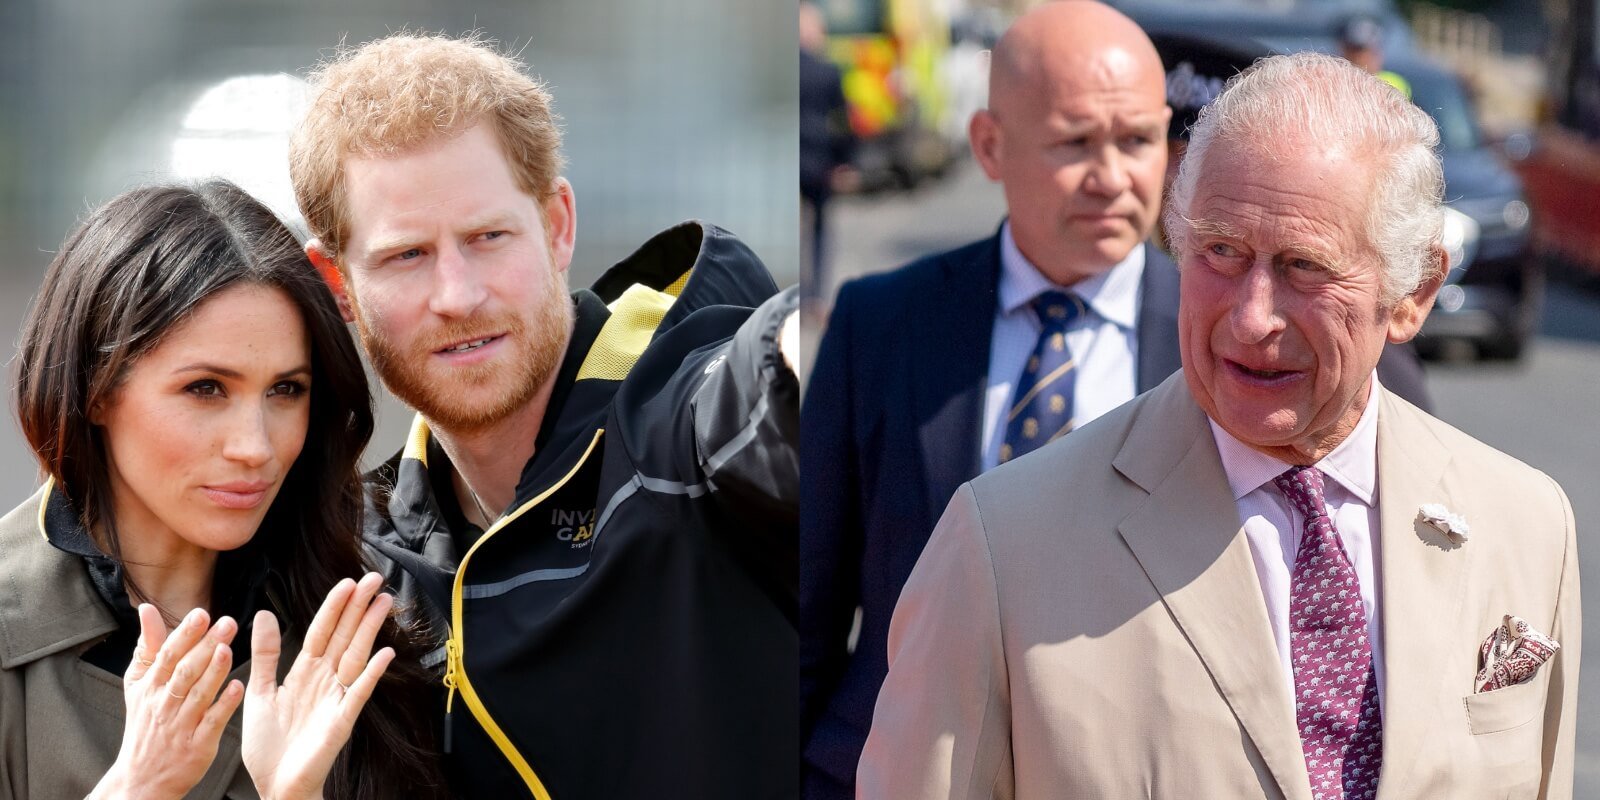 Meghan Markle, Prince Harry and King Charles in side-by-side photographs.